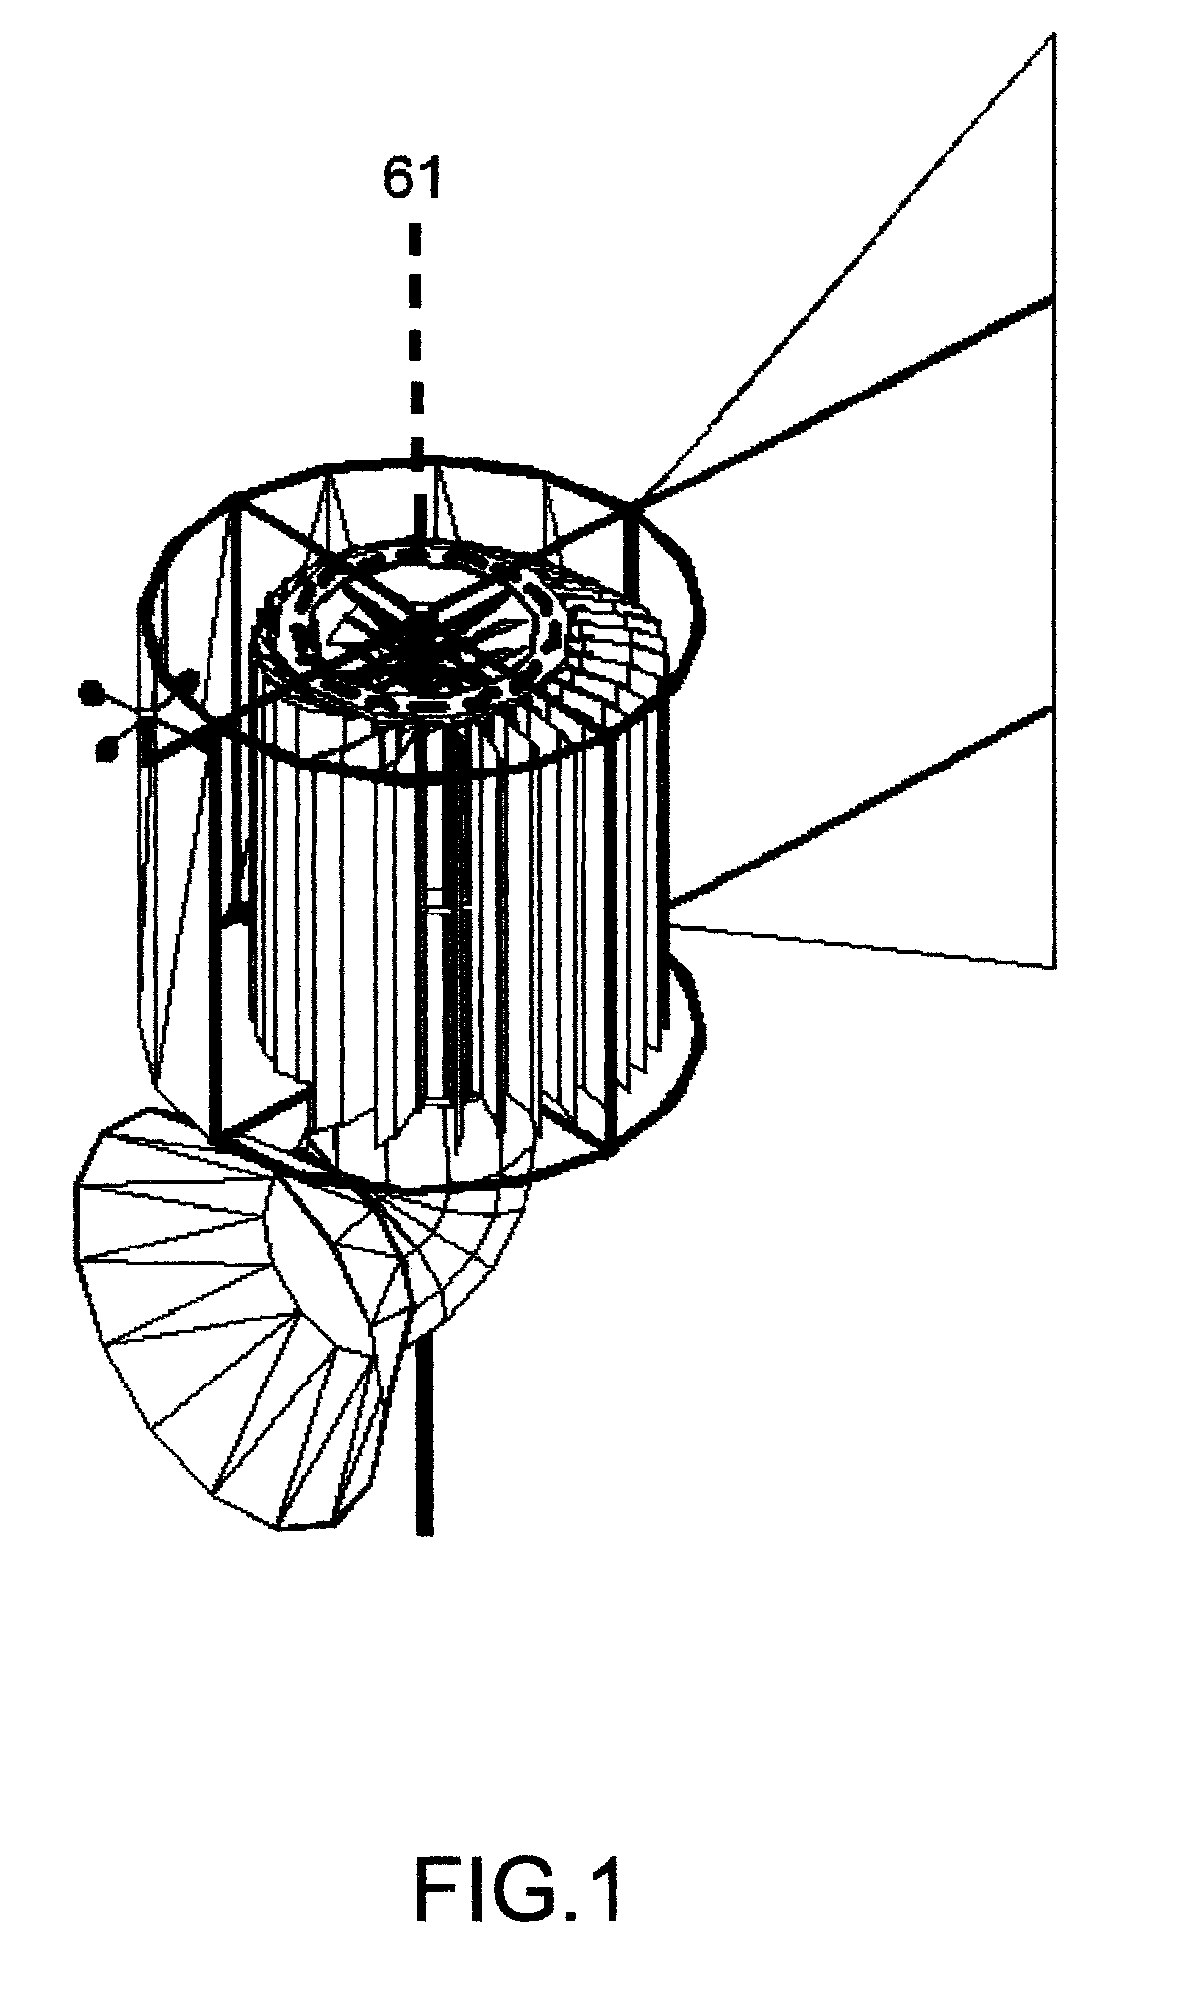 Vertical axis variable geometry wind energy collection system